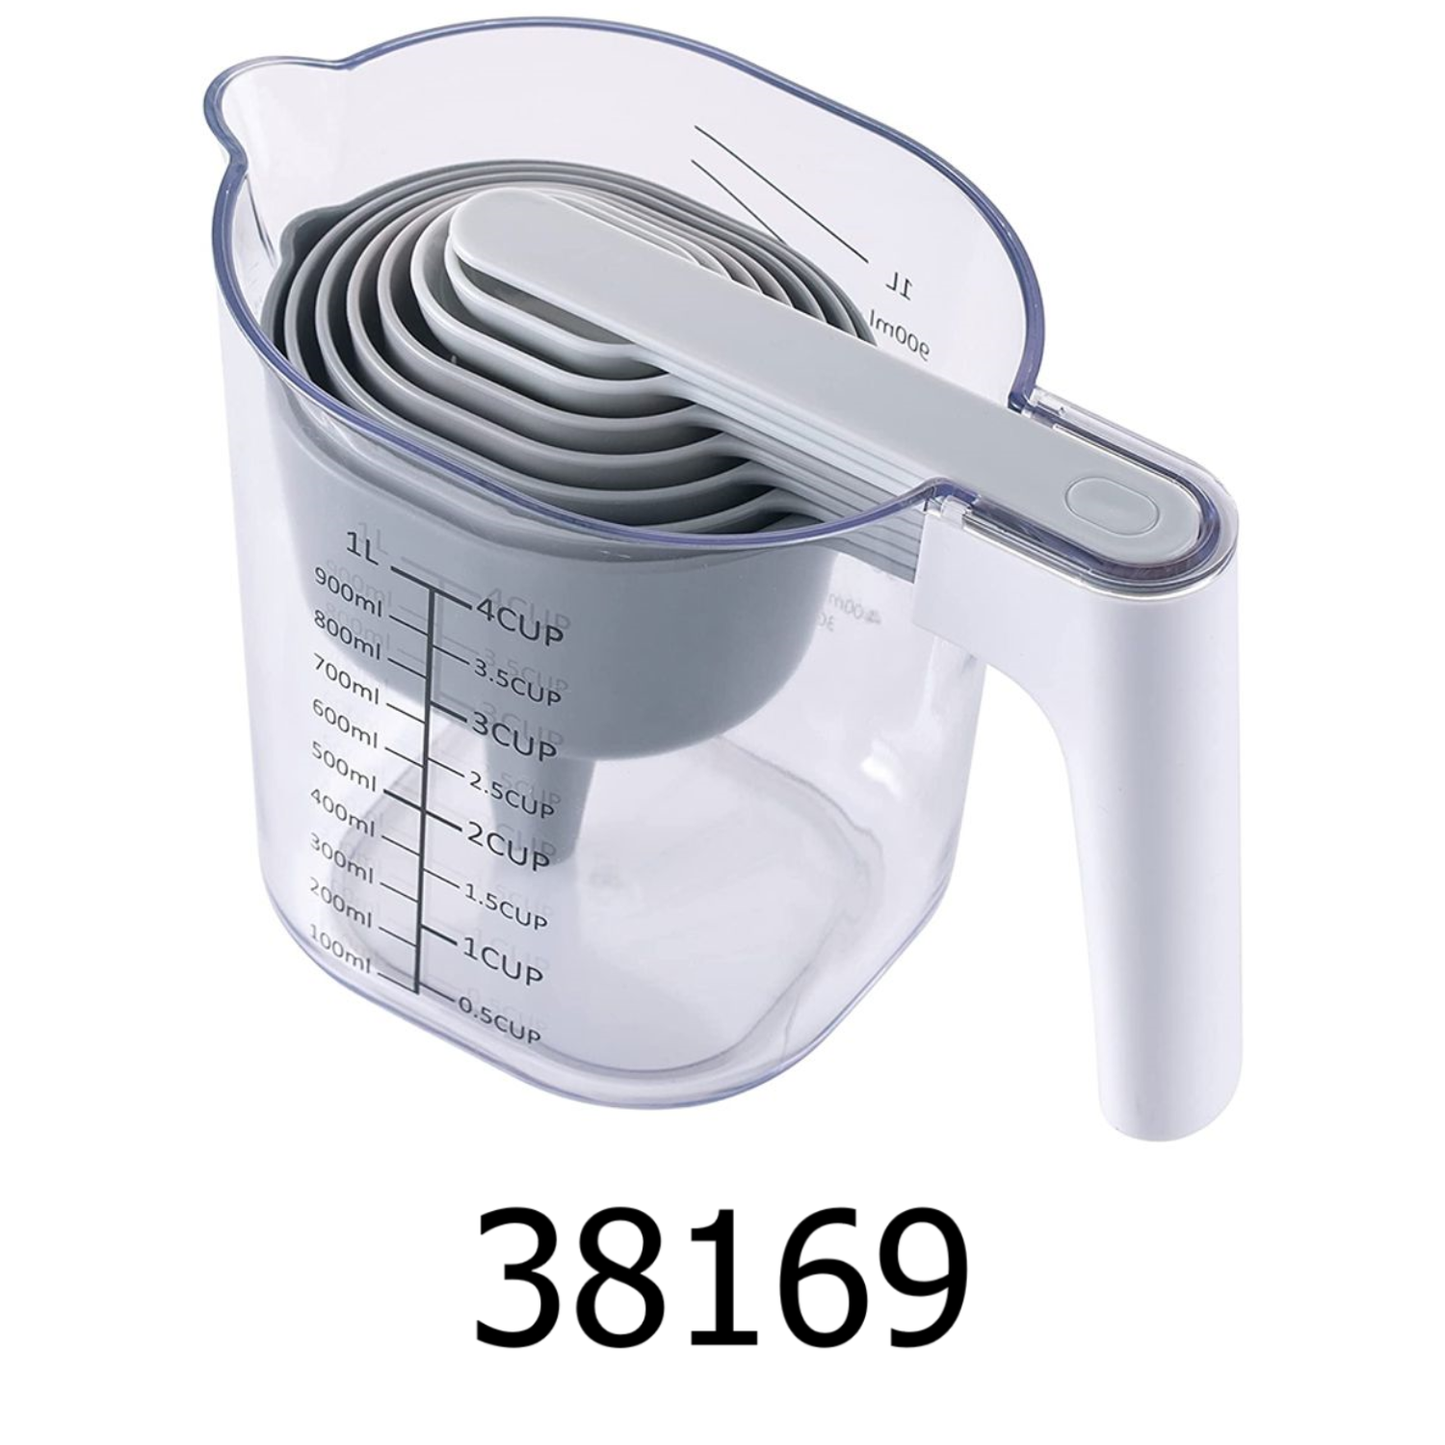 measuring cup, 1.5cup plastic - Whisk